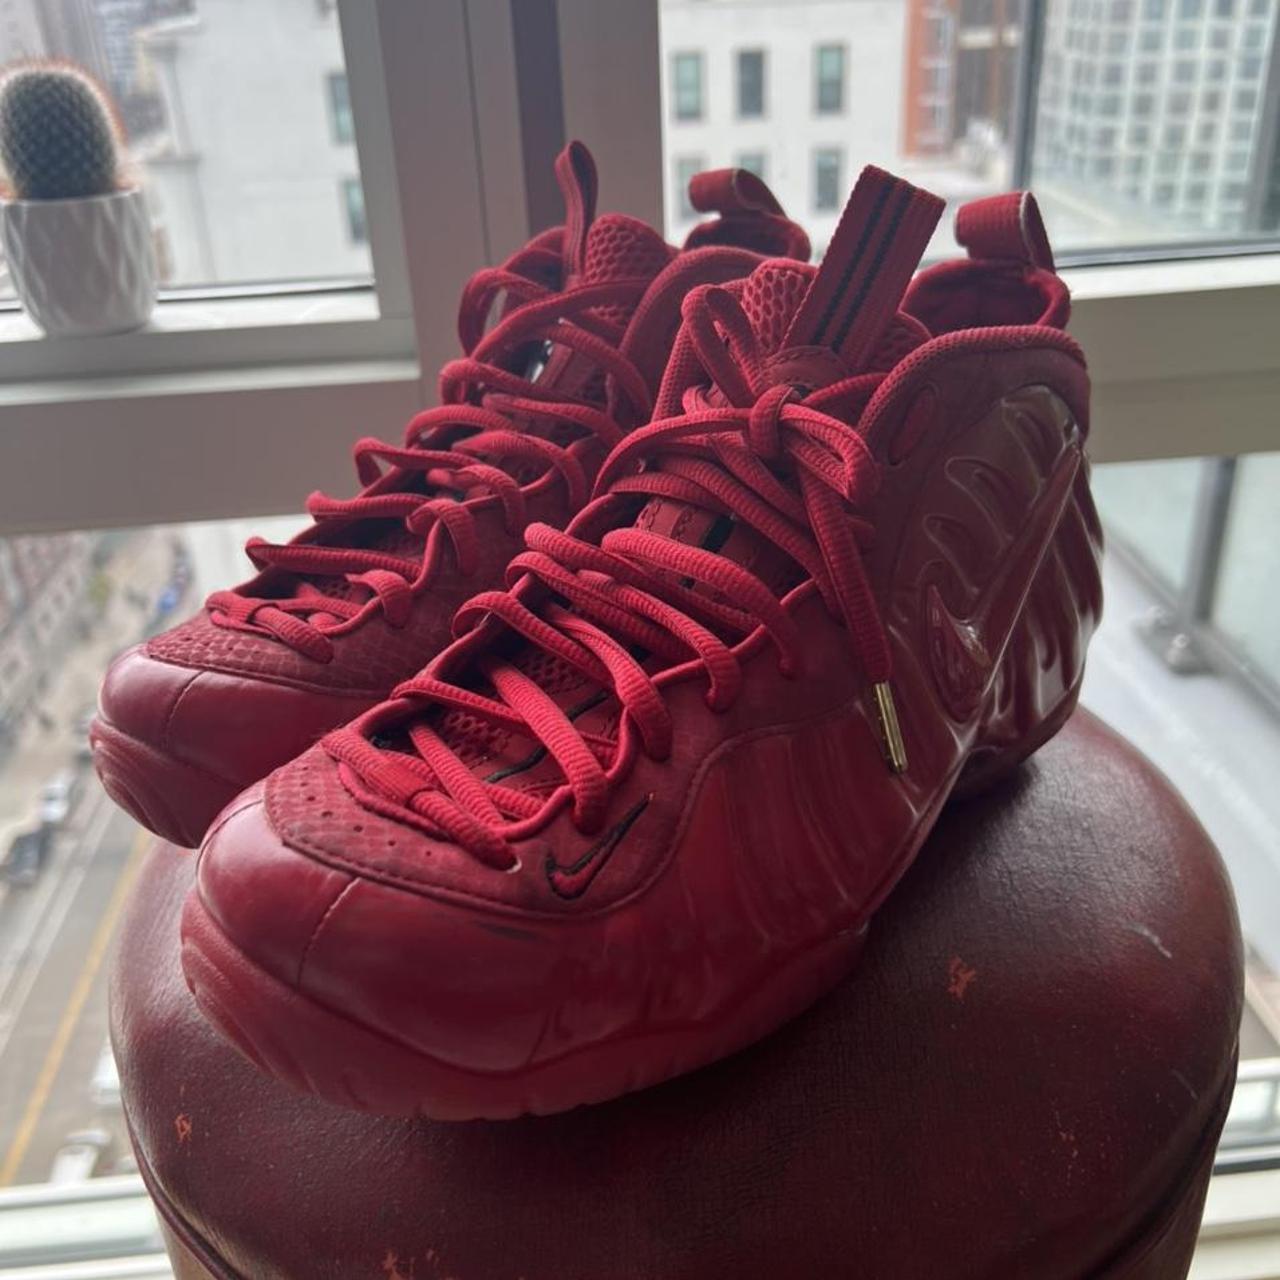 Product Image 1 - RED OCTOBER NIKE AIR FOAMPOSITES